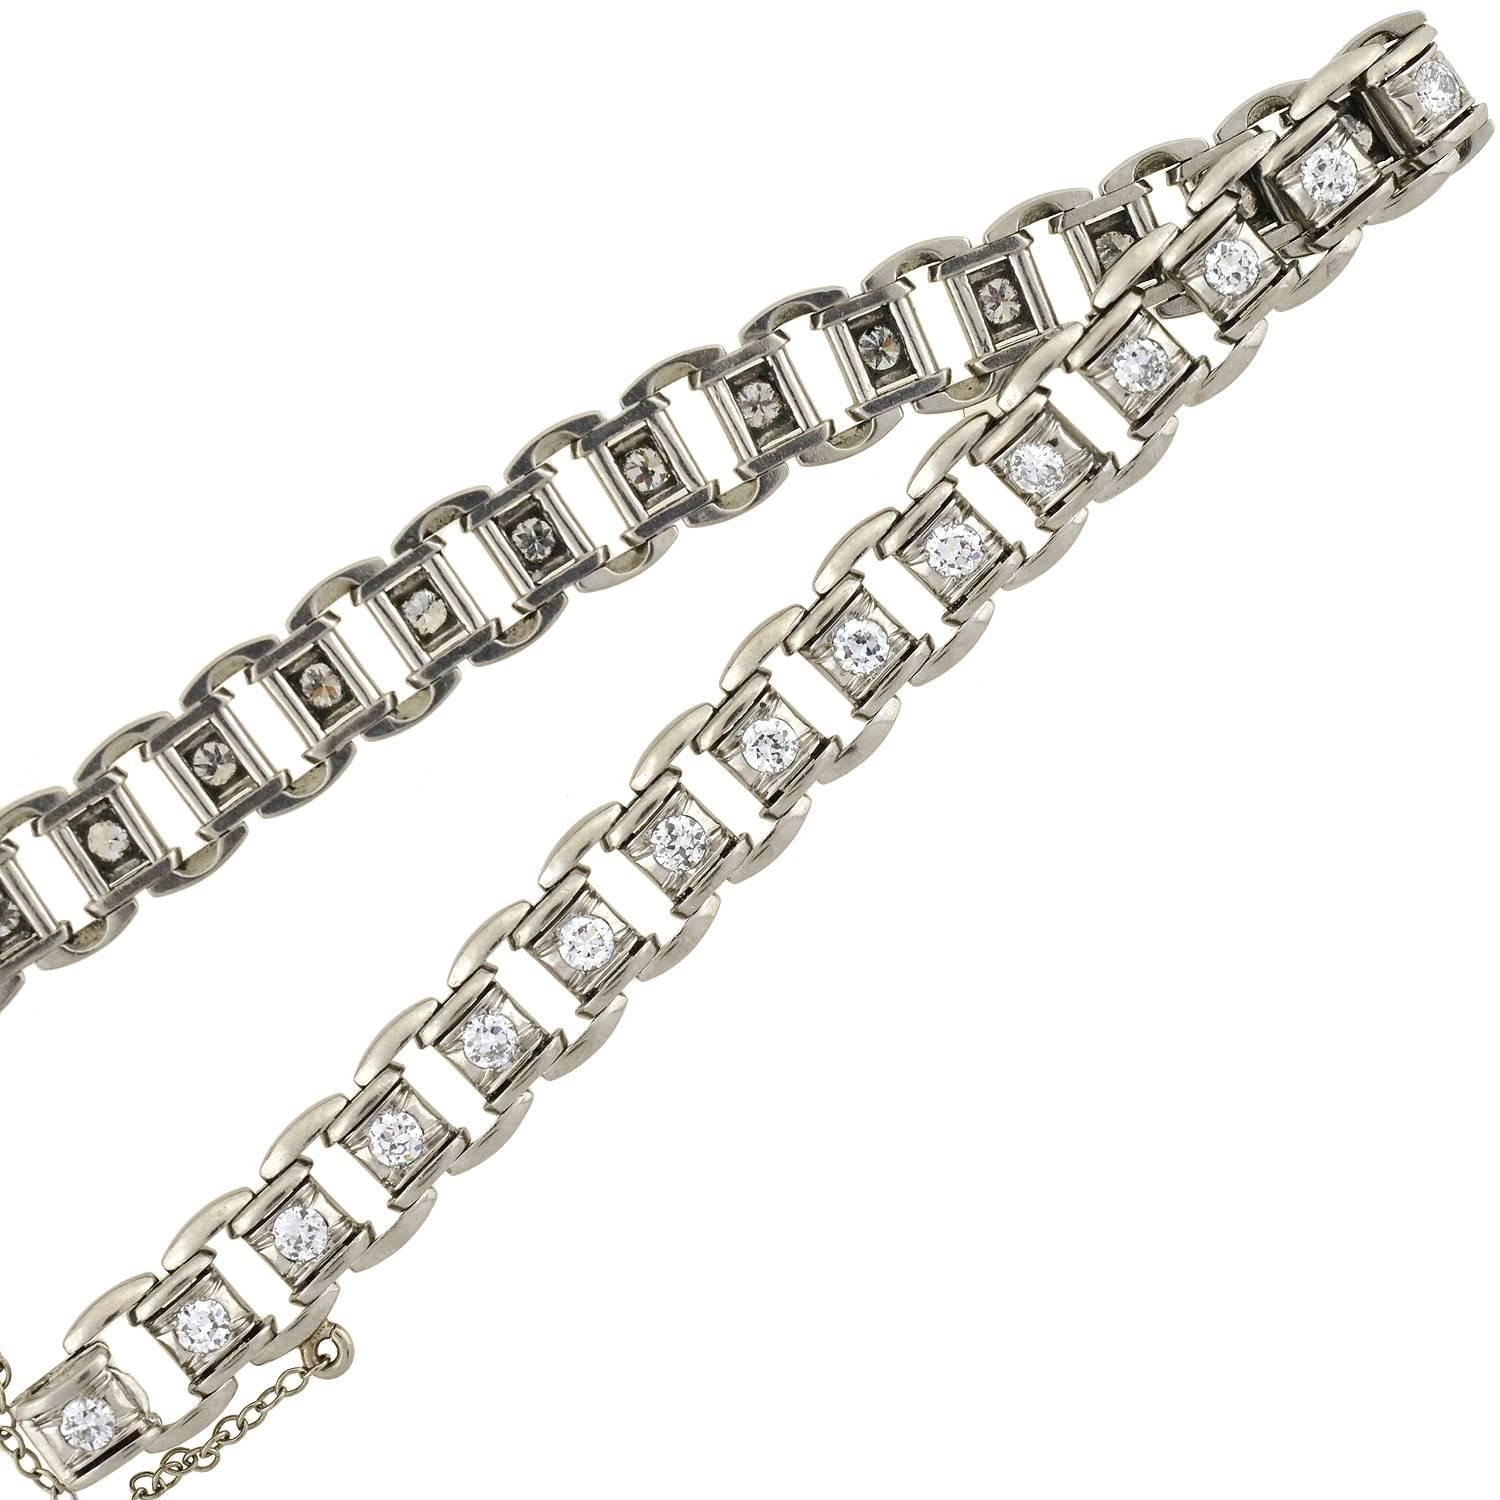 A lovely link bracelet from the Art Deco (ca1930s) era! This platinum bracelet is comprised of hinged "tire track" links that form a straight but flexible design. Each individual box link is set with a sparkling old European cut diamond,